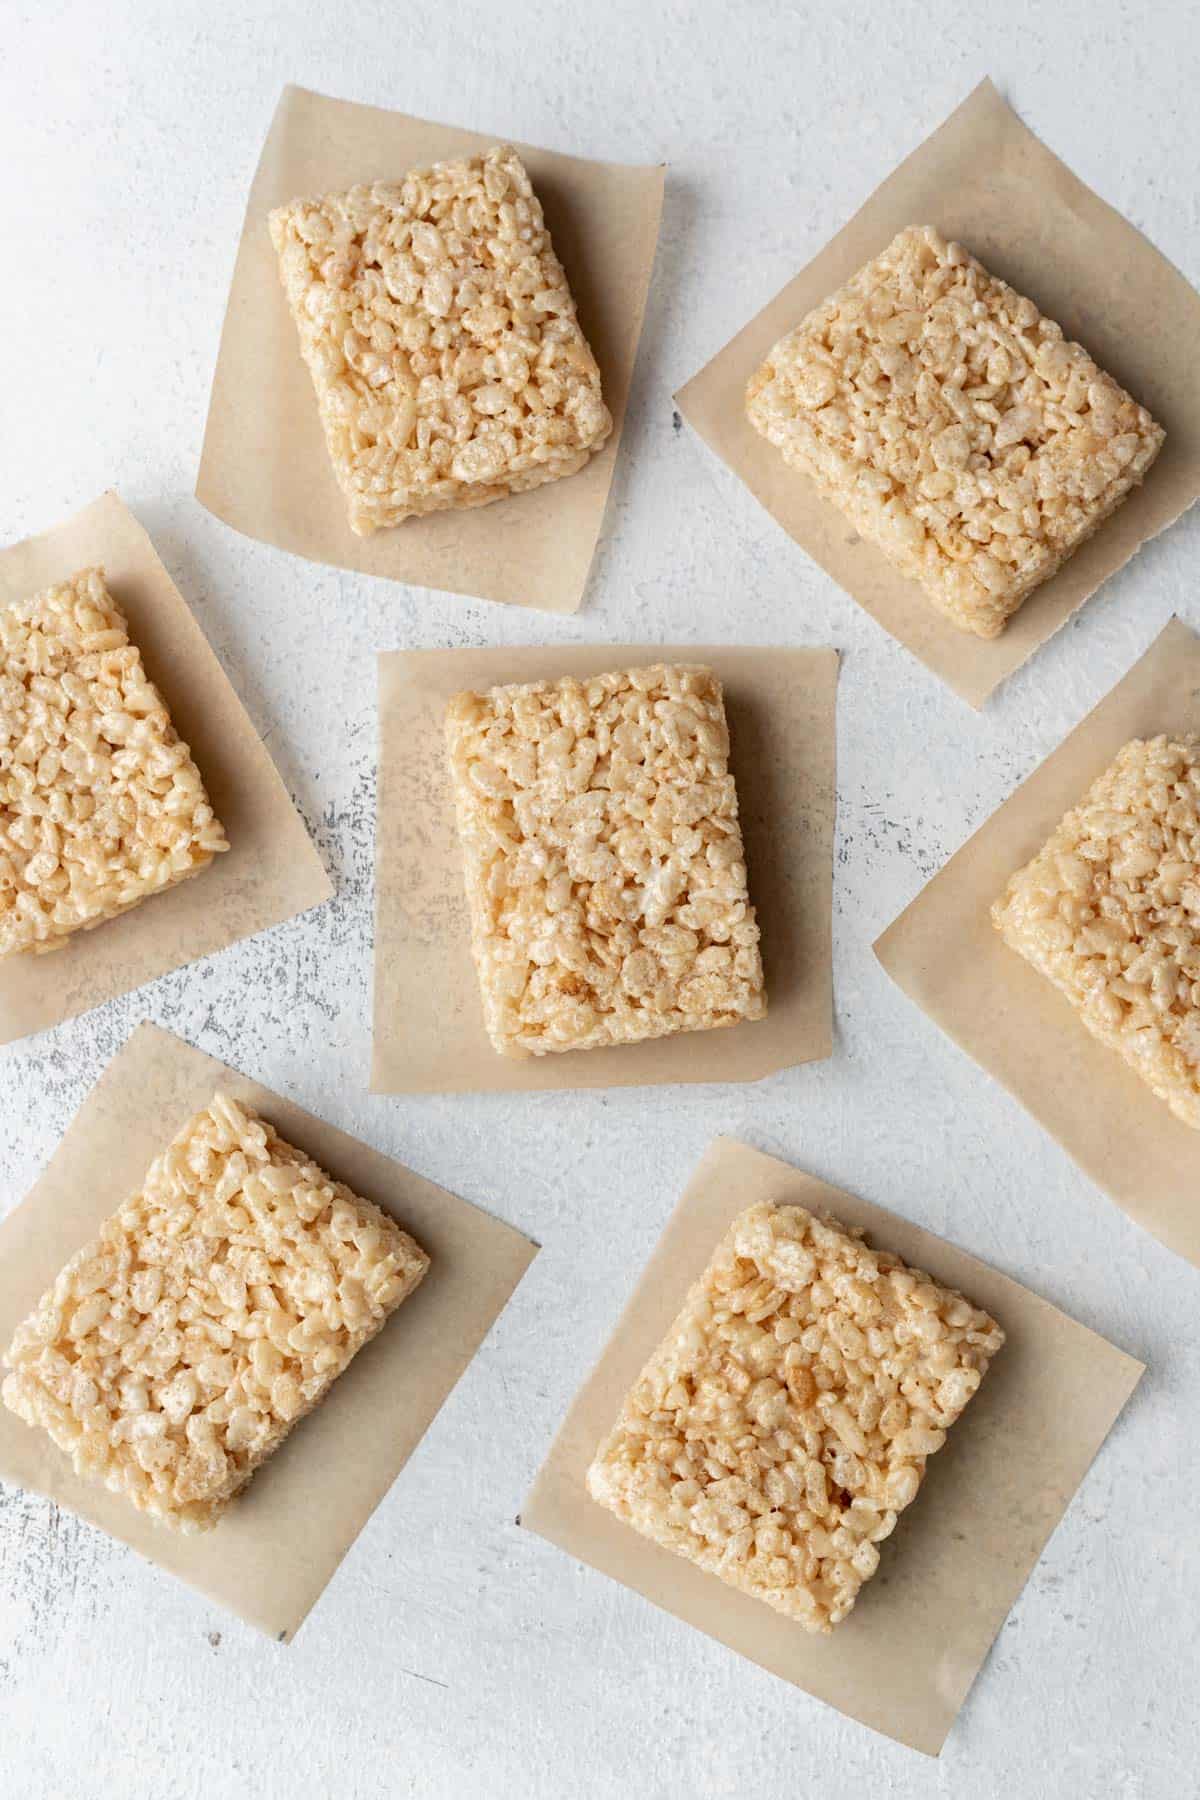 Rice krispie treats separated into rectangles before decorating.